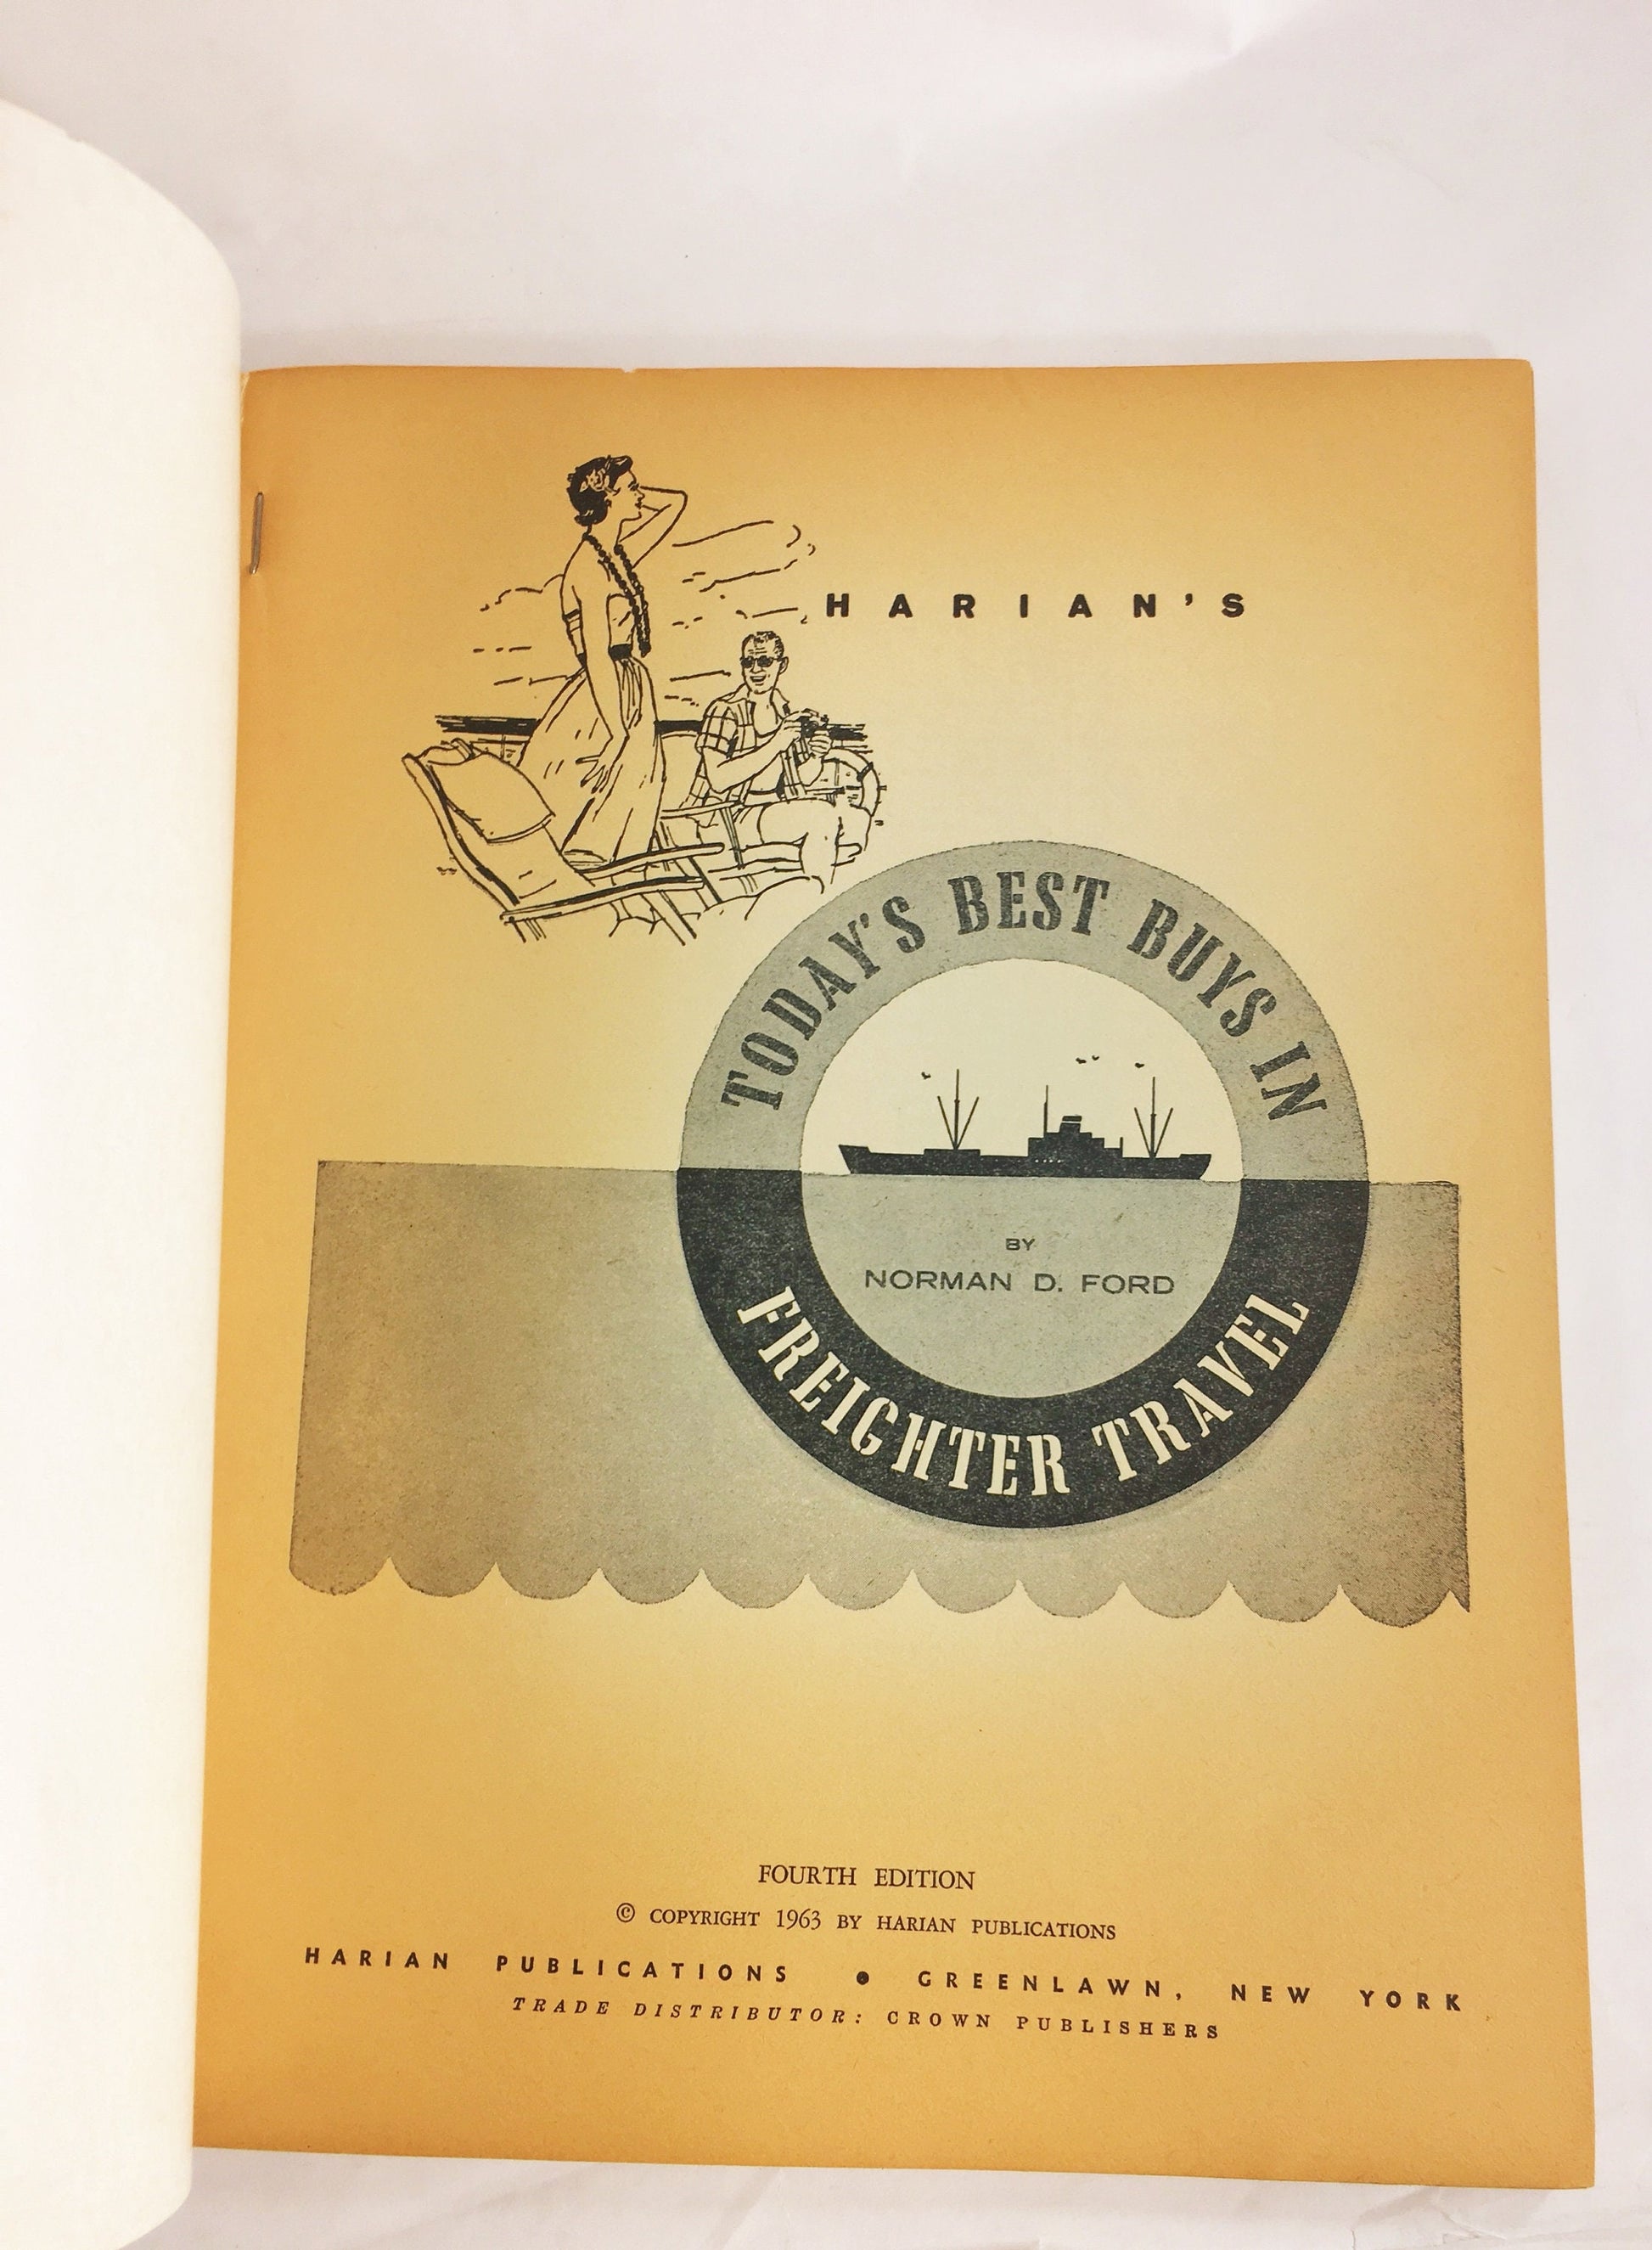 1963 Today's Best Buys in Freighter Travel. Harian's Vintage paperback book circa 1963